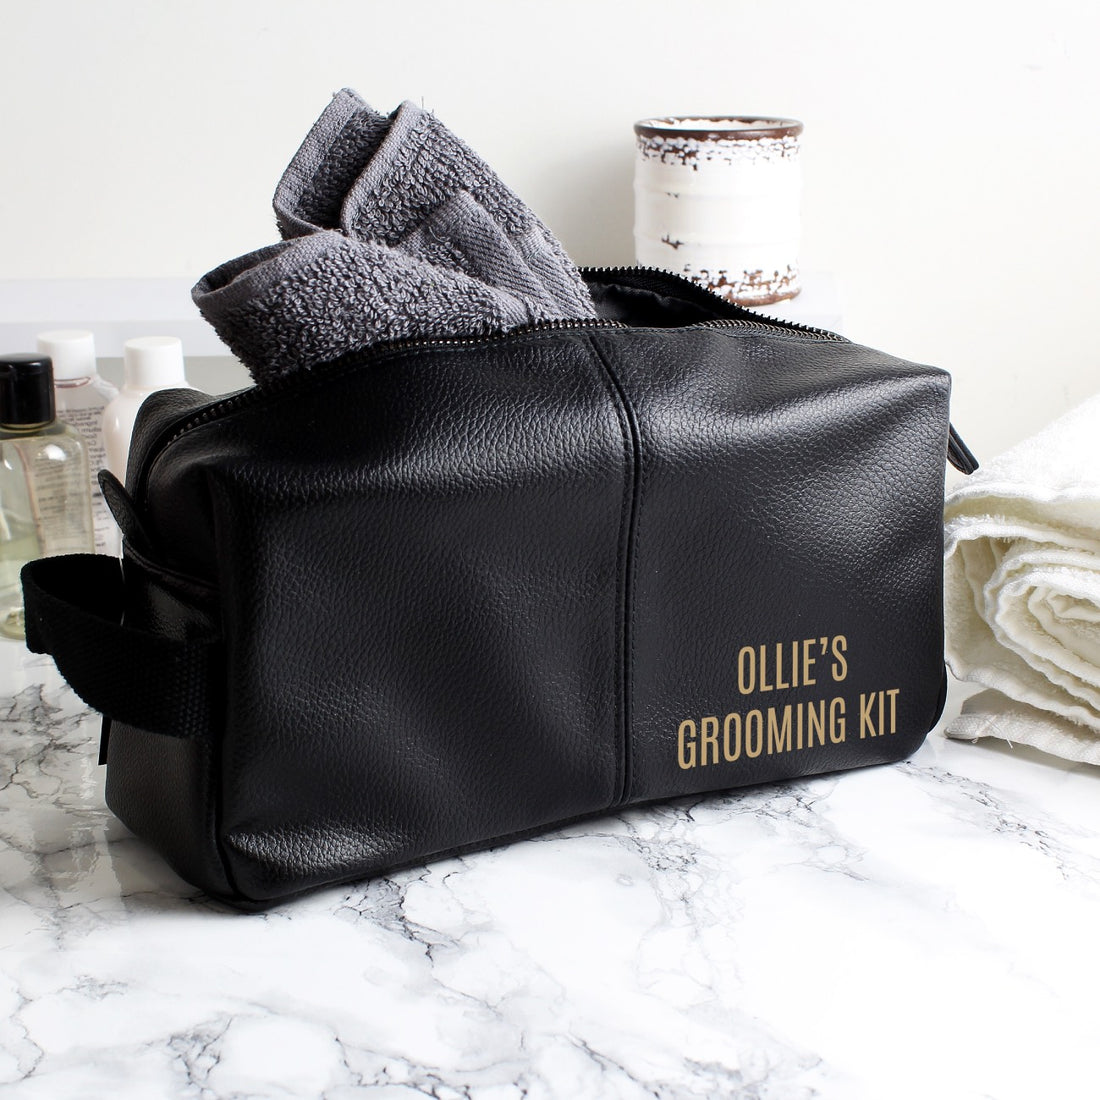 Wash bag for storing your dog's grooming kit